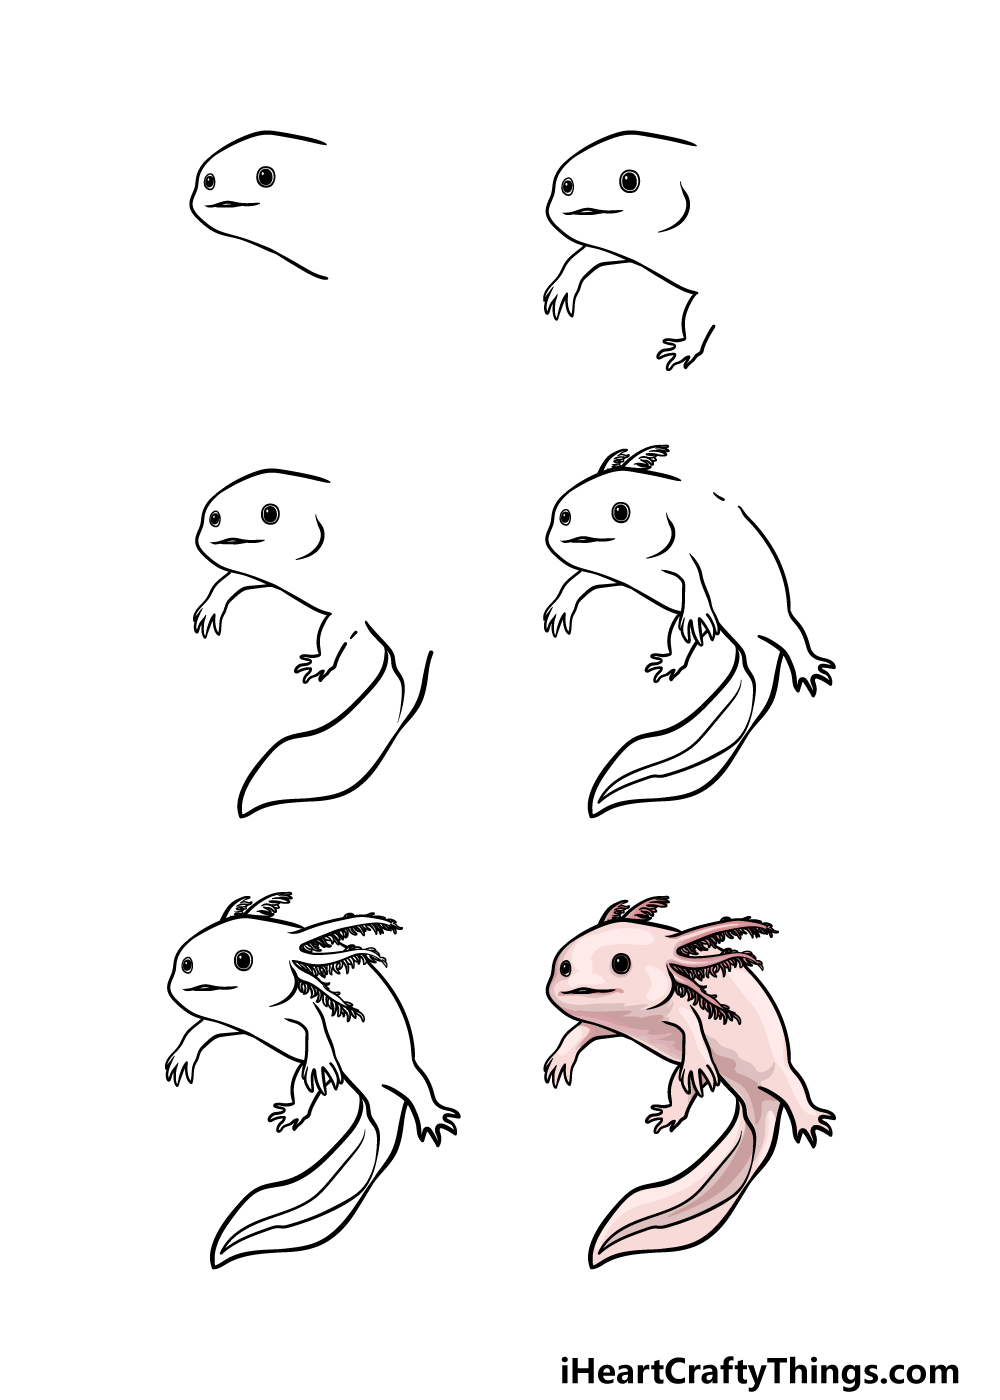 how to draw axolotl in 6 easy steps